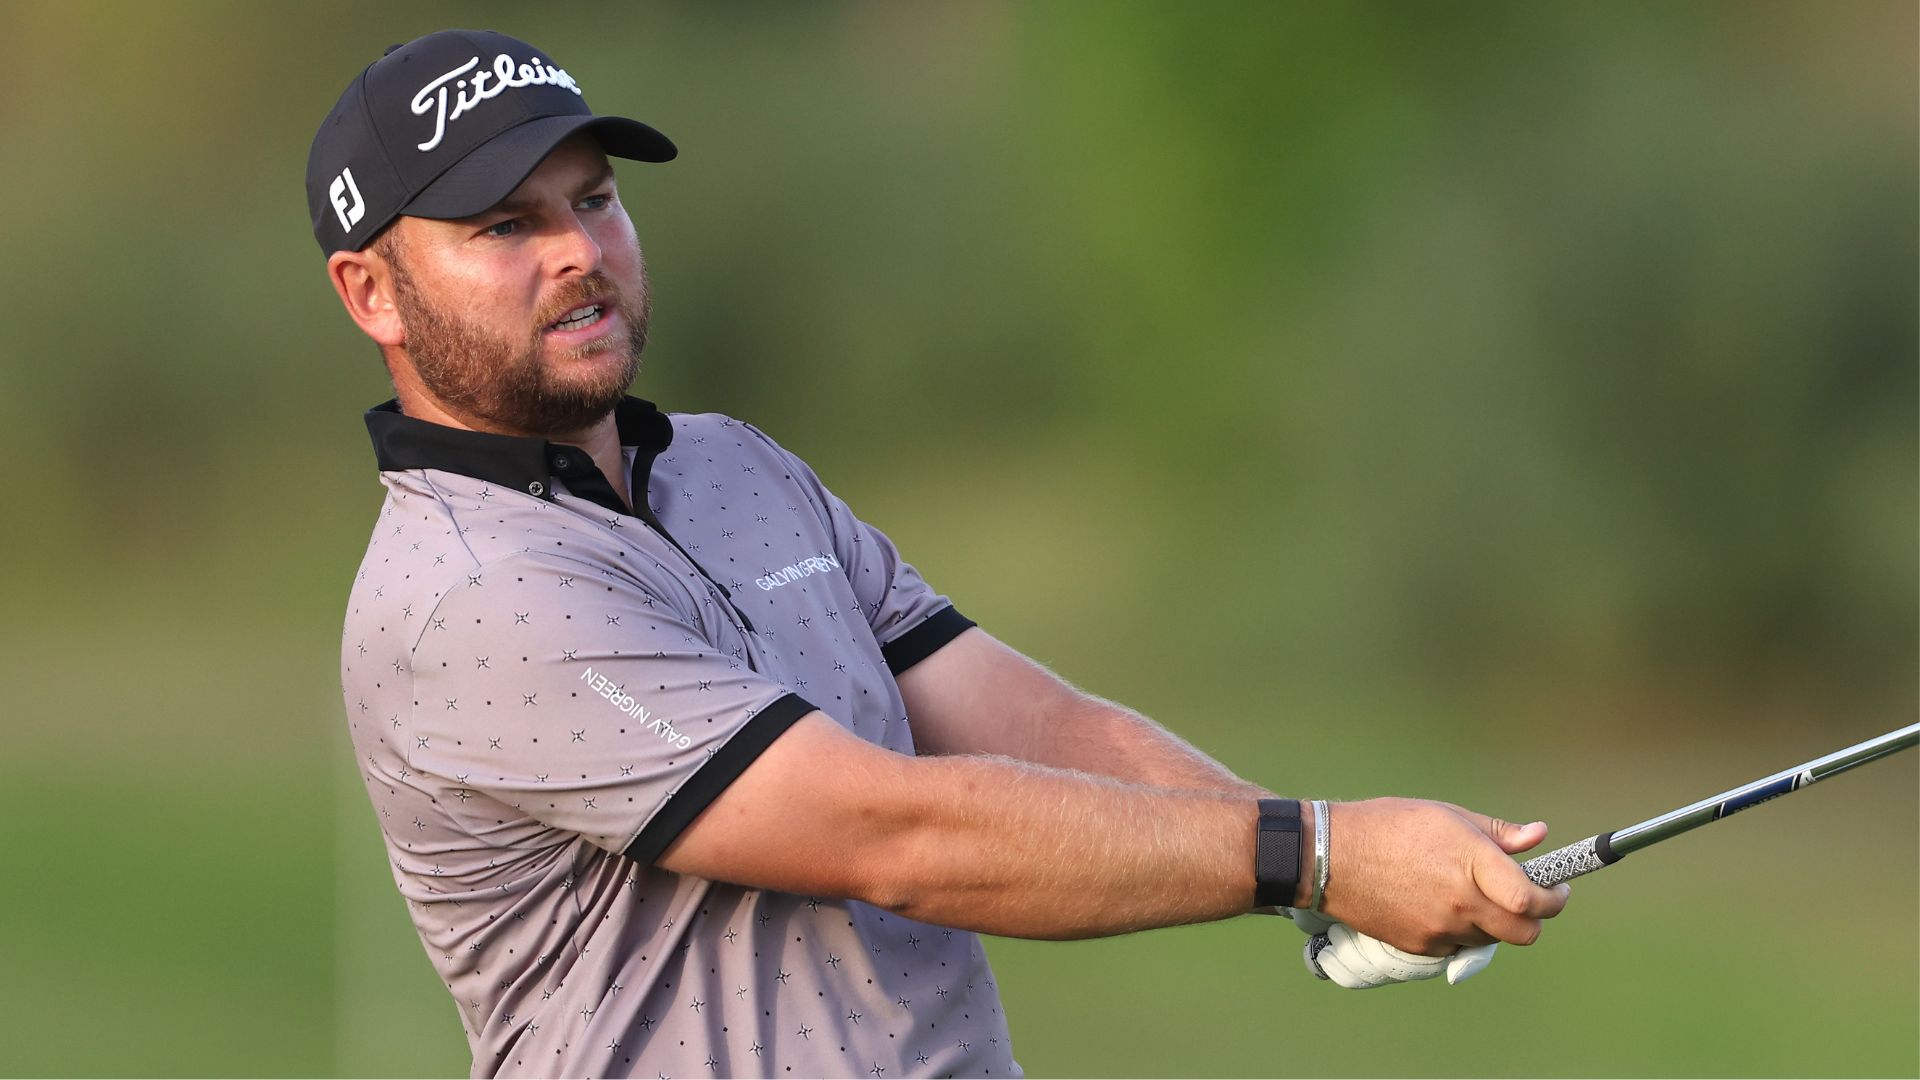 Despite feeling under the weather, Jordan Smith grabs opening Portugal Masters lead